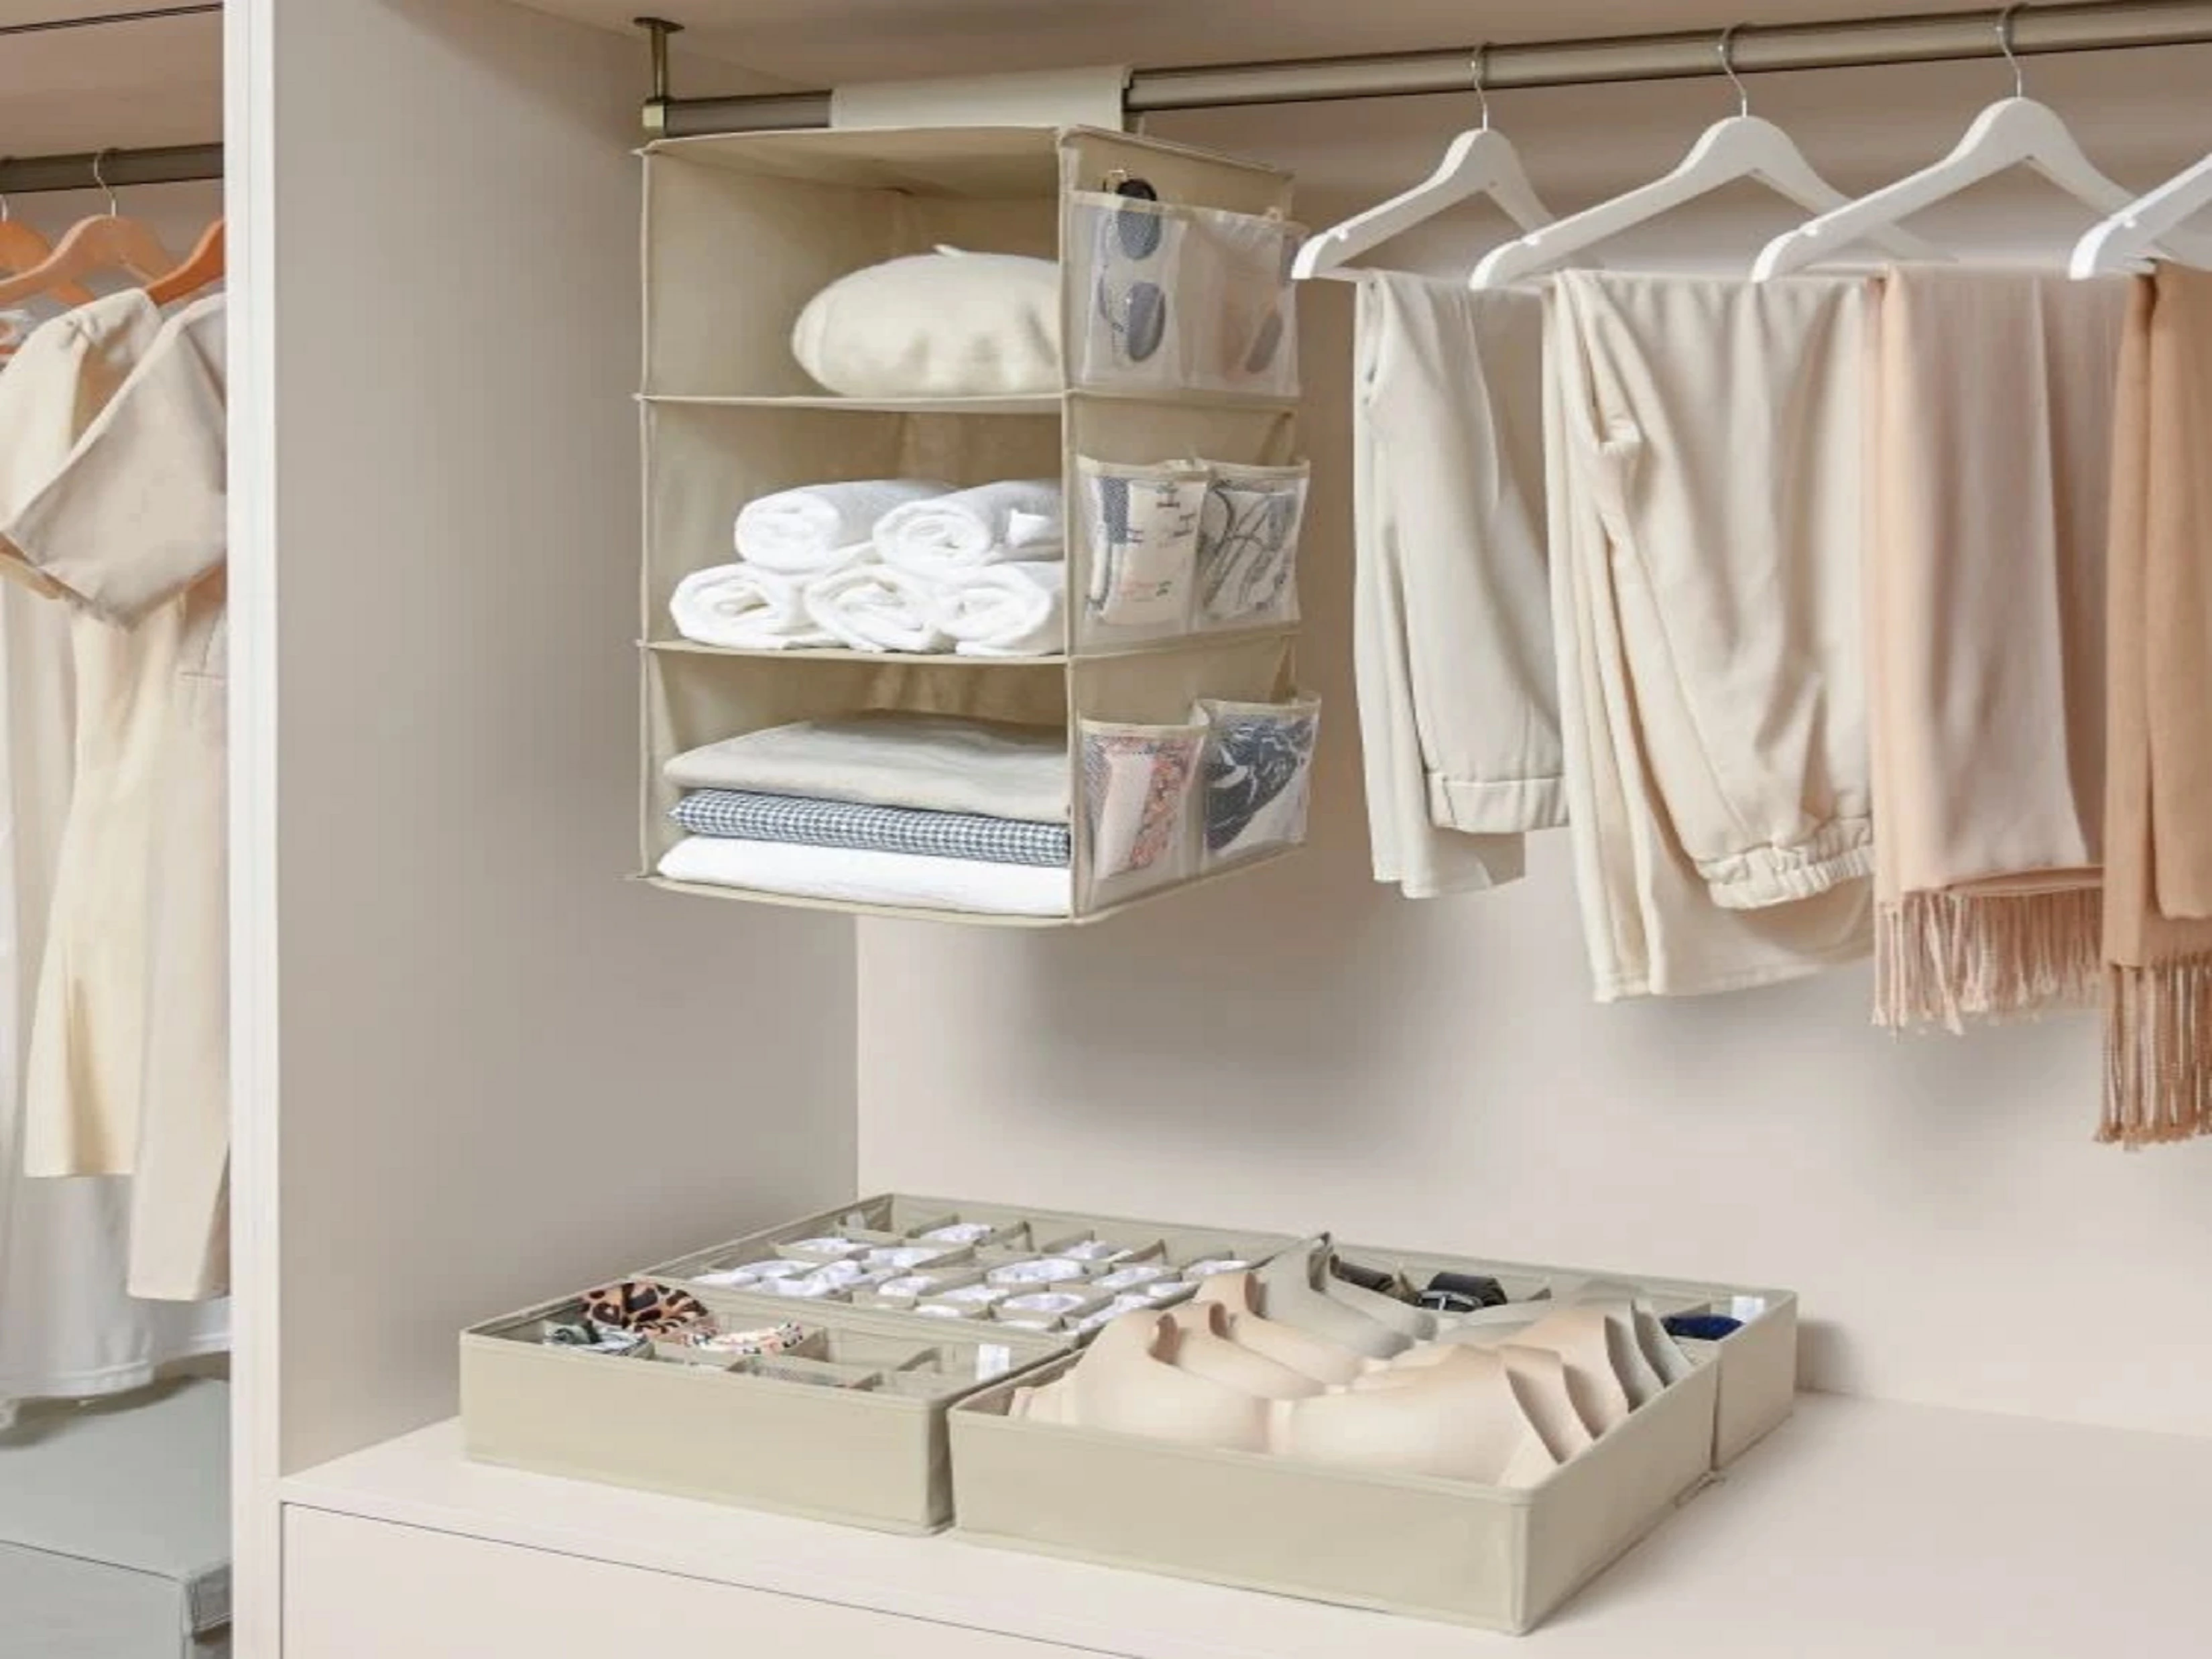 Hot Picks Program In Storage & Laundry Ideas: EISHO Provides Exceptional Quality at Unbeatable Prices!